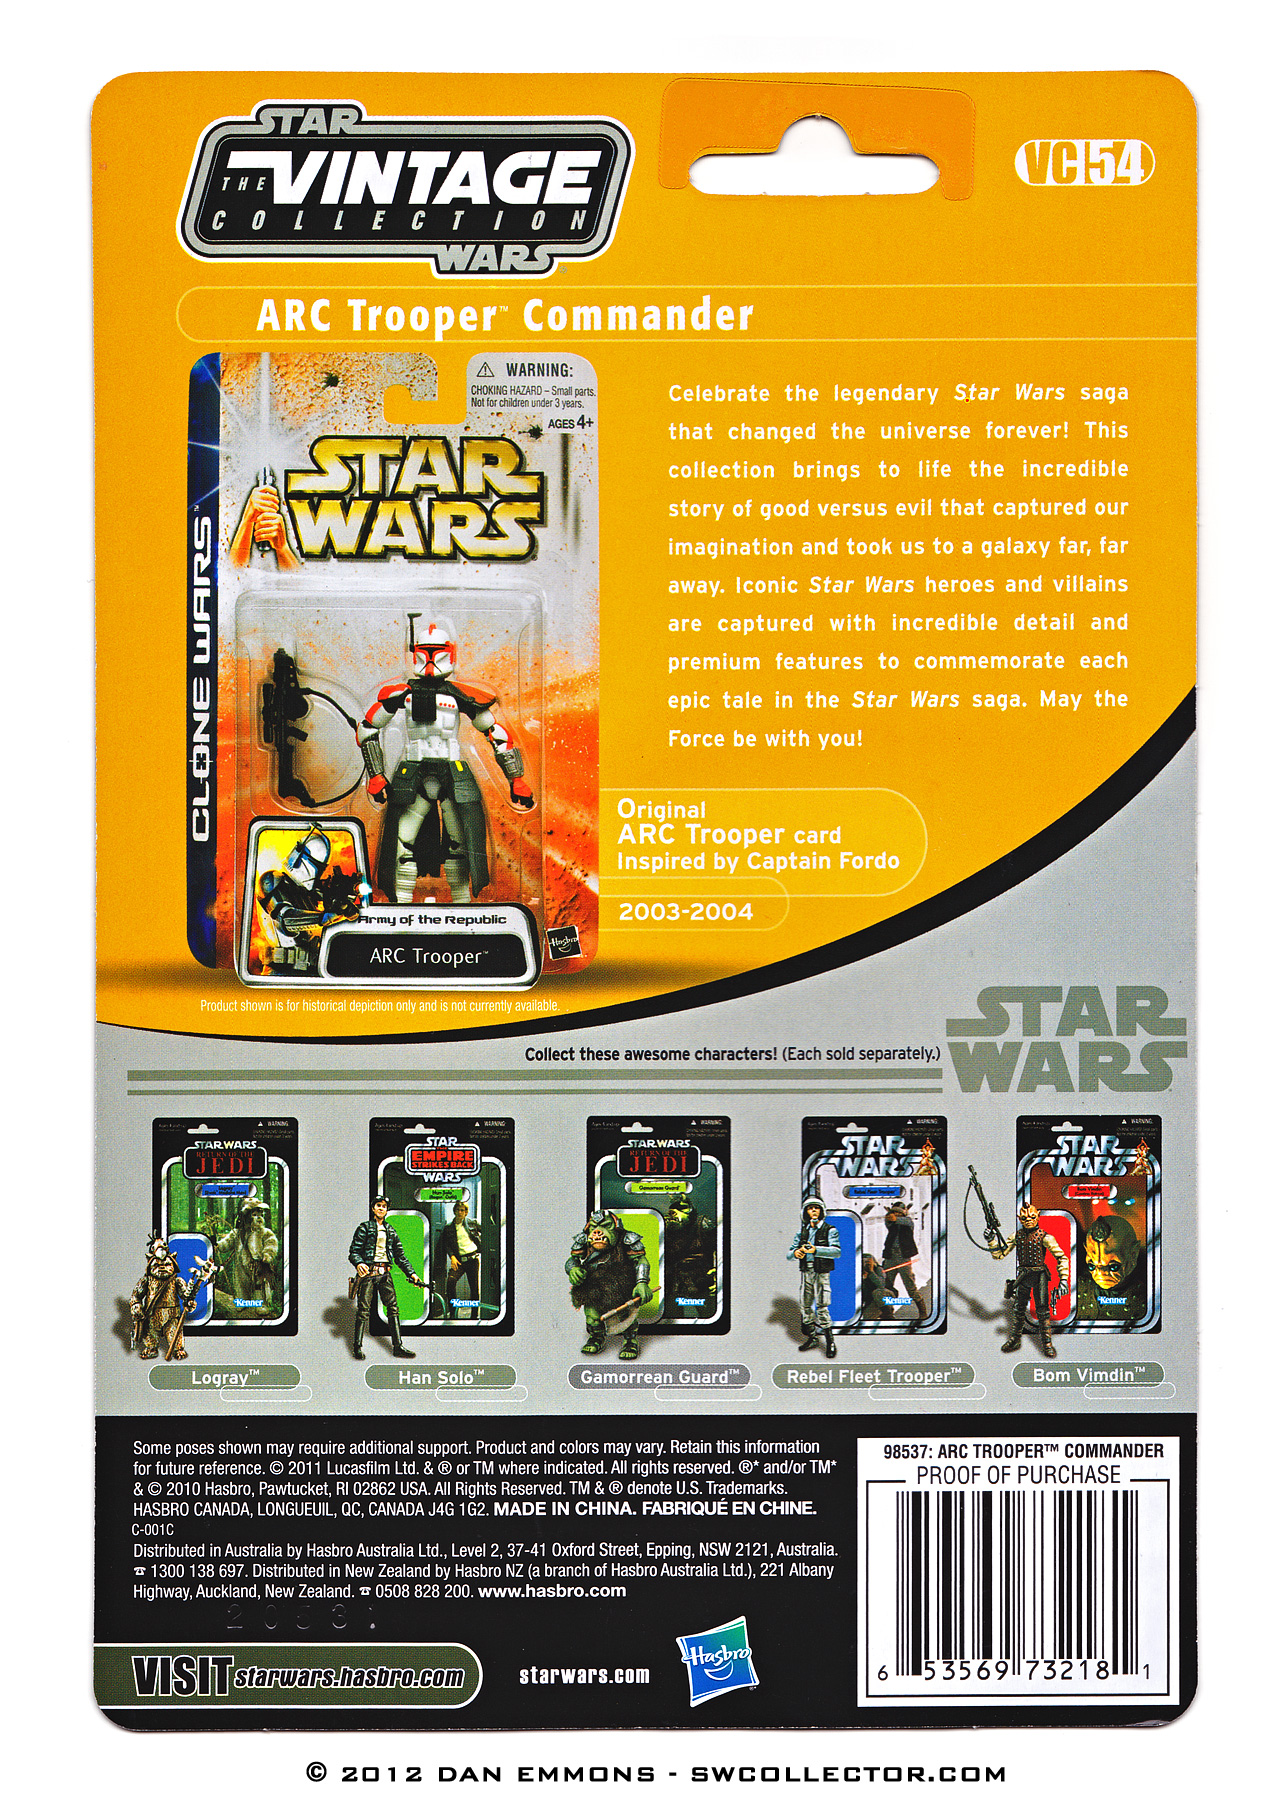 The Vintage Collection - VC54: ARC Trooper Commander - Variation - UPC Has Changed To 6 53569 73218 1